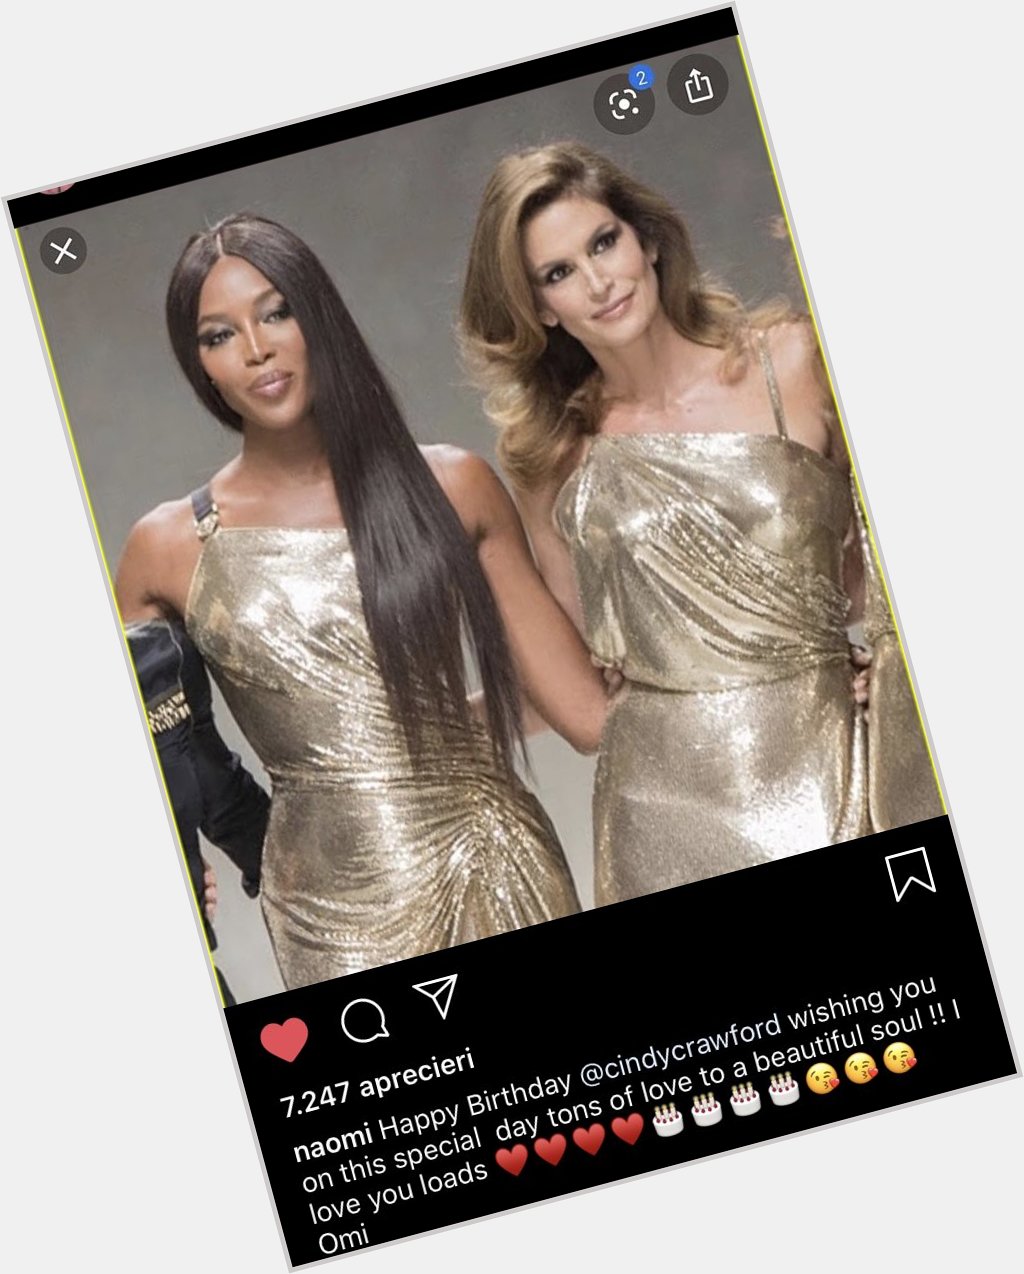 Not naomi campbell googling a pic of her and cindy crawford to wish her happy birthday and not even cropping it 